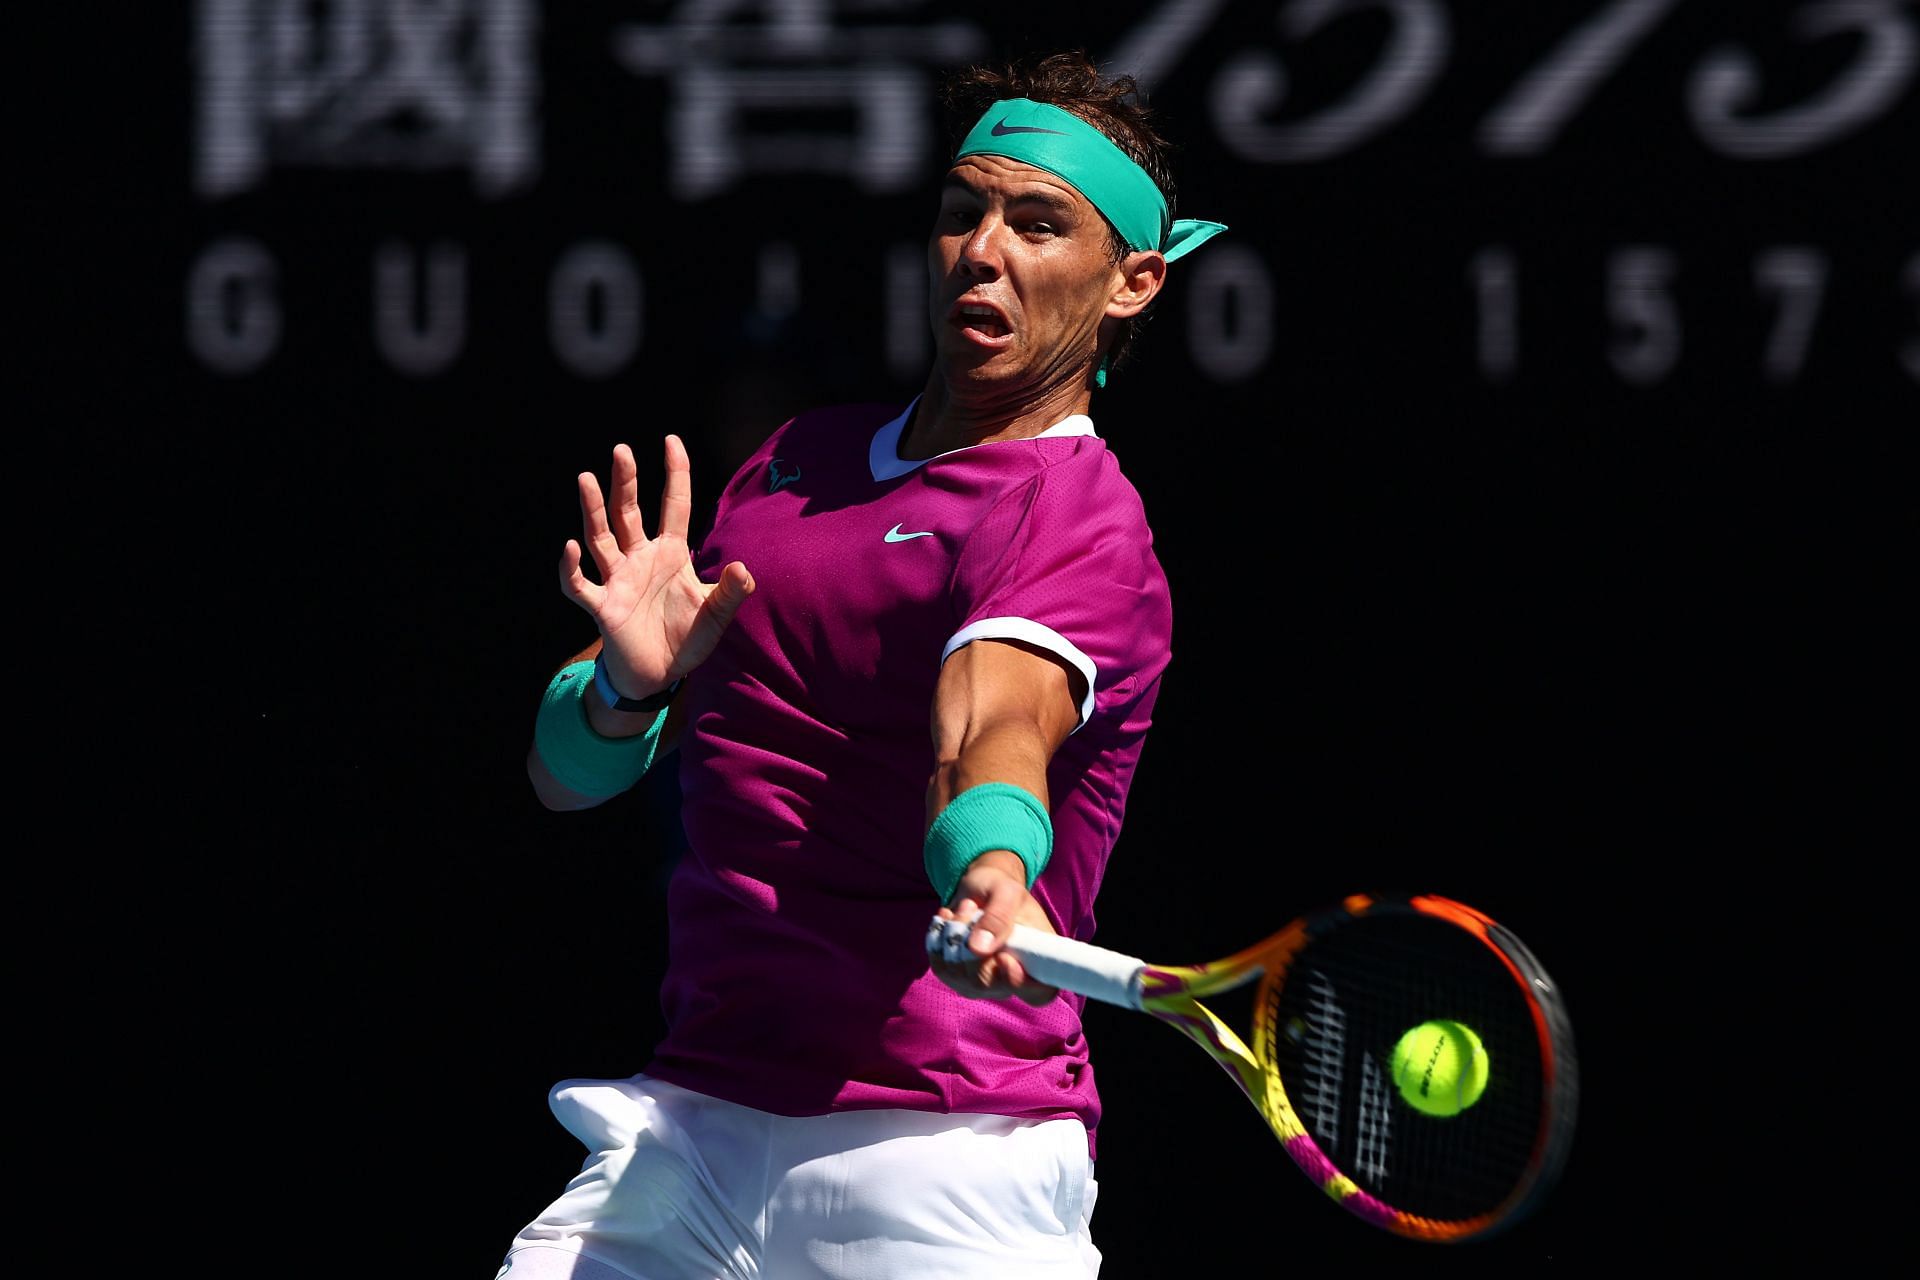 Rafael Nadal hit an outrageous drive volley against Marcus Giron at the 2022 Australian Open